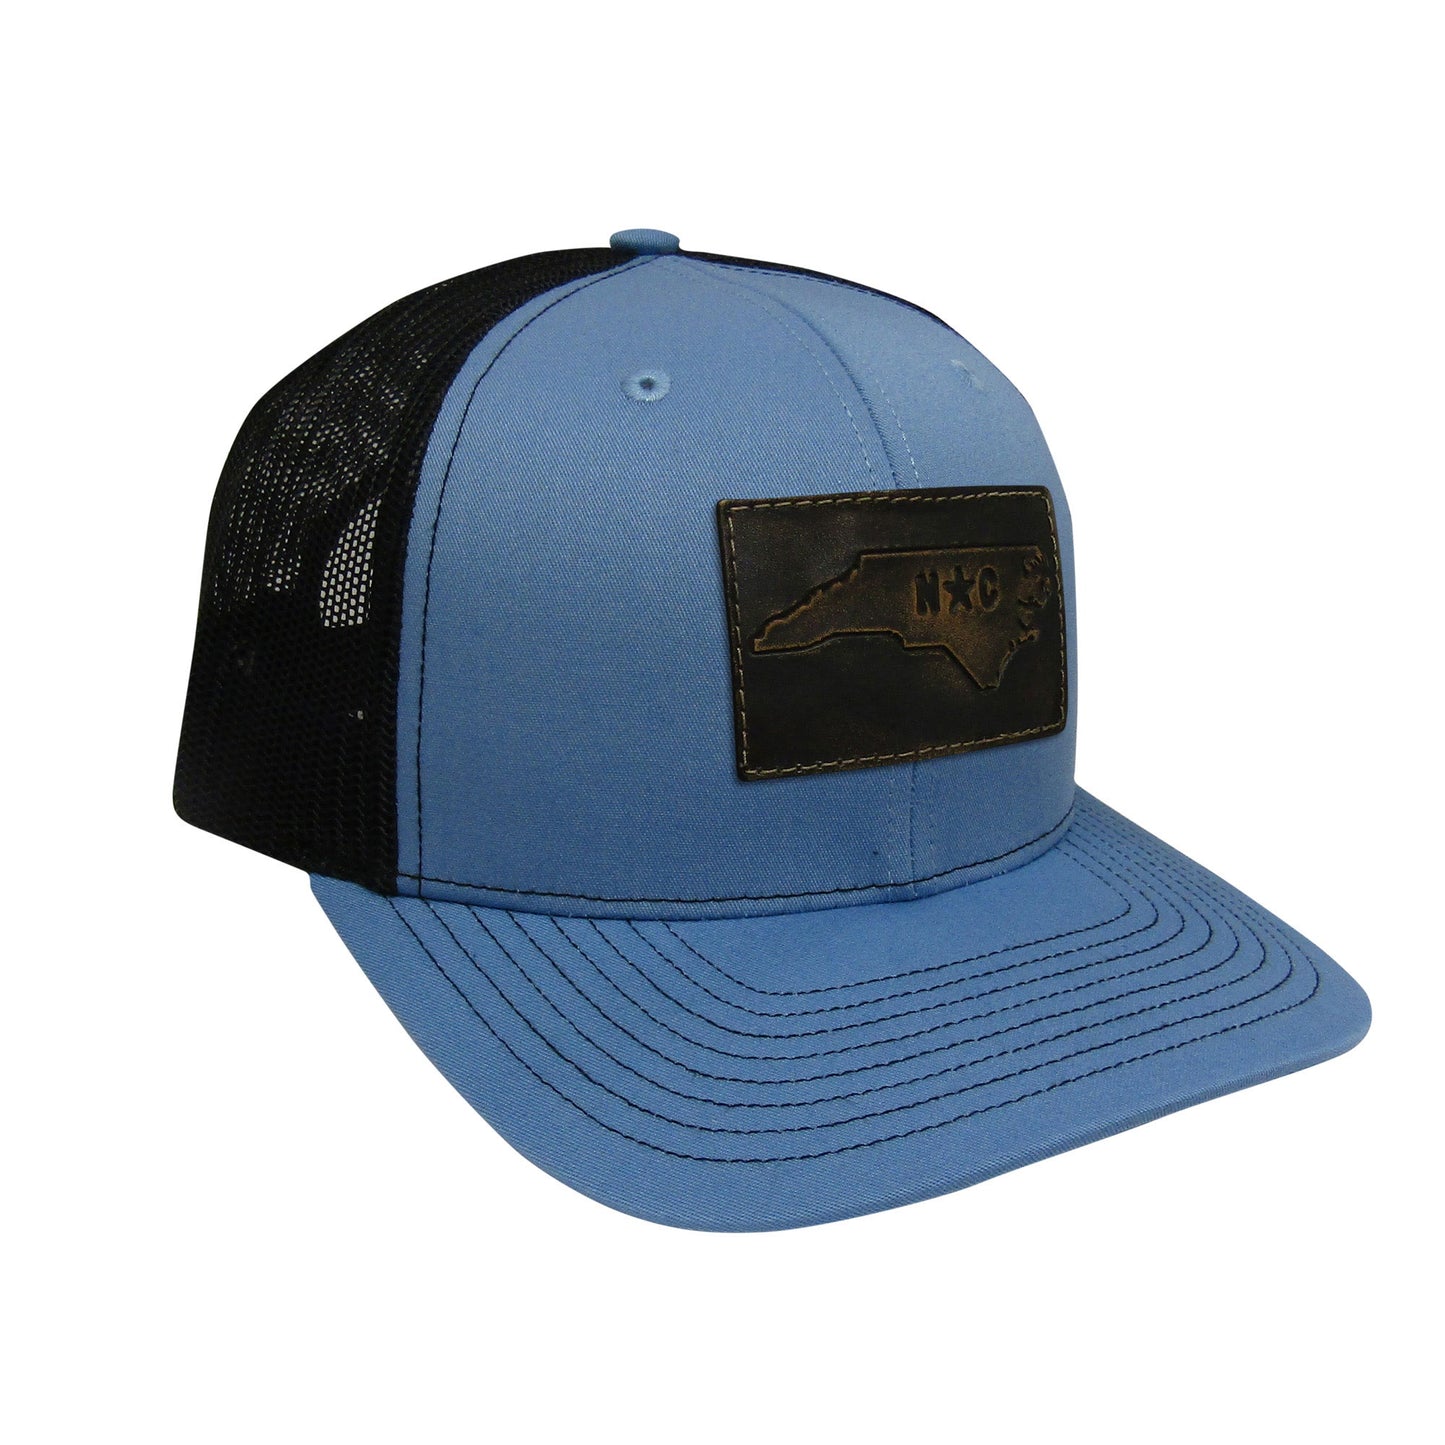 North Carolina Blue Richardson Hat with Leather Patch and Mesh Snapback